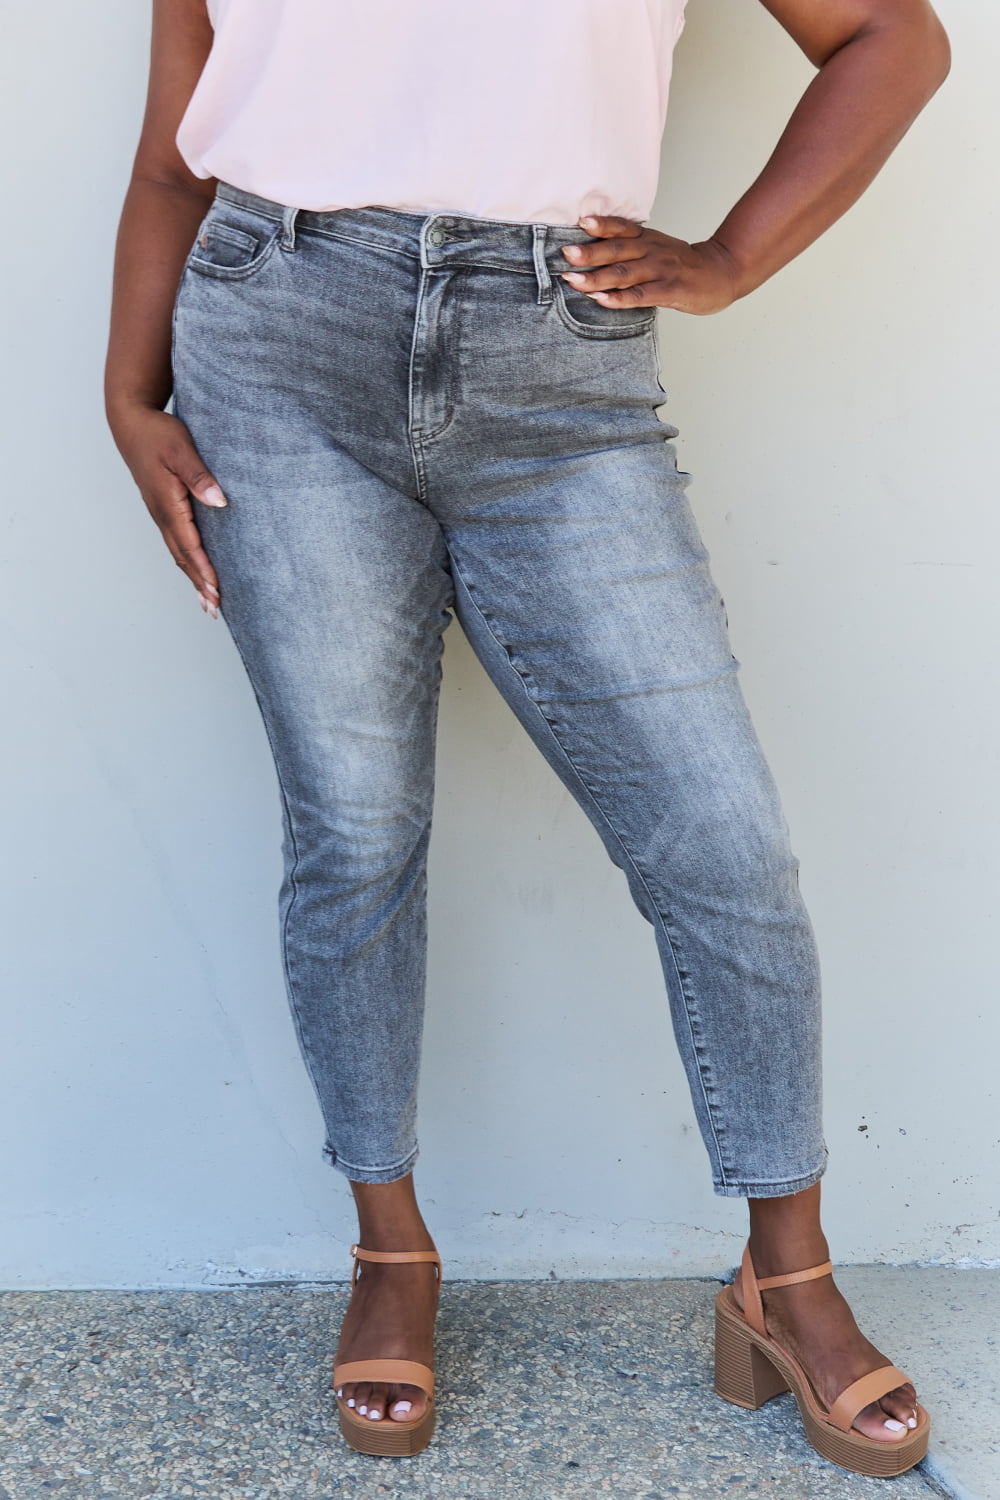 Judy Blue Racquel Full Size High Waisted Stone Wash Slim Fit Jeans  Krazy Heart Designs Boutique   